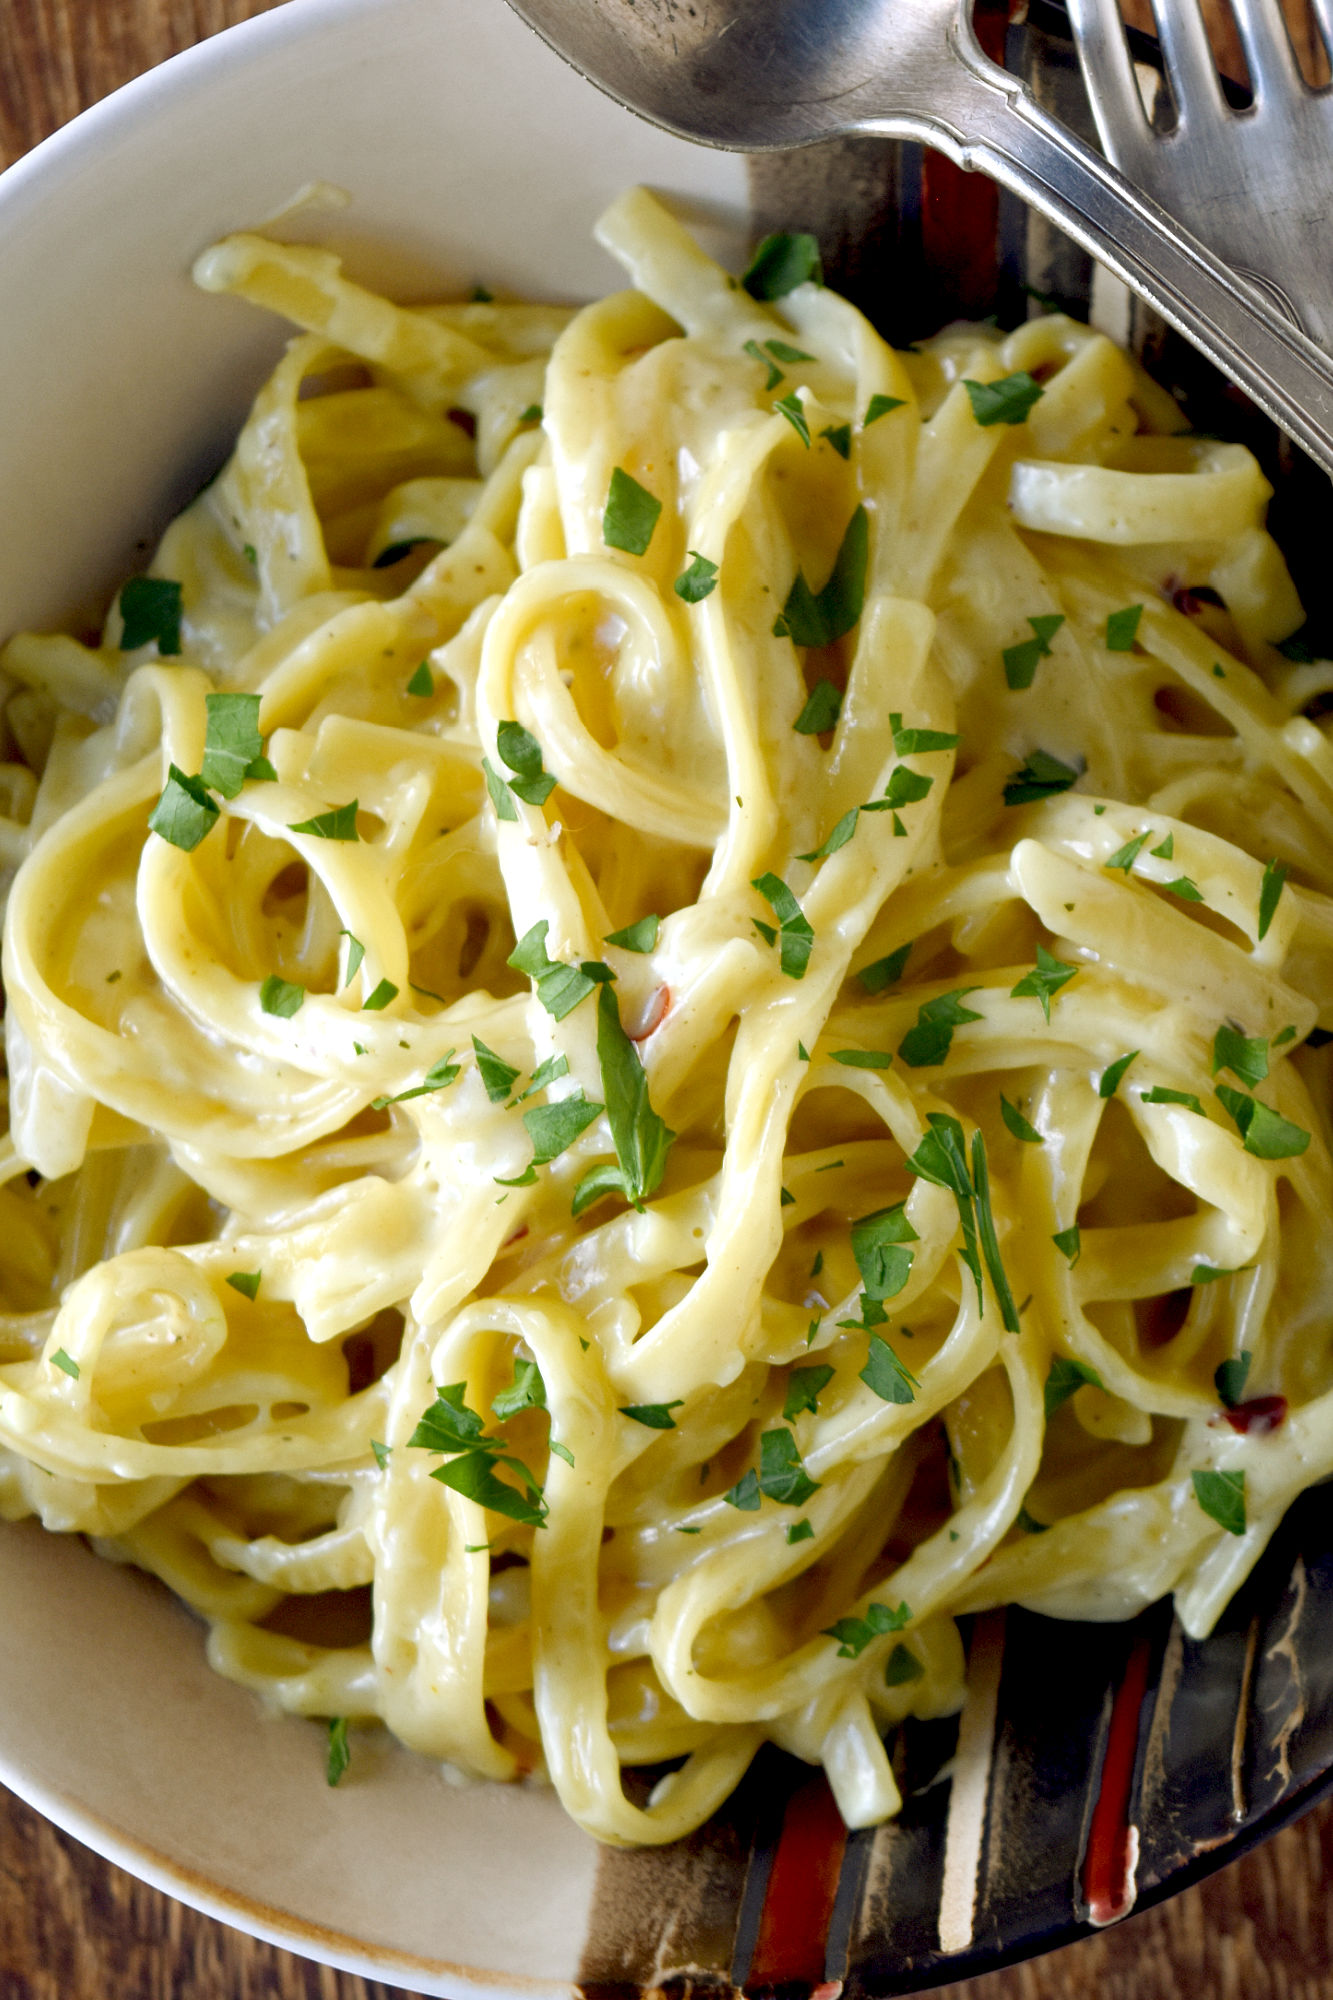 One Pot Creamy Garlic Alfredo is super simple, quick, and tastes amazing. It comes together in under 30 minutes, cooks in one pot, and is a pasta recipe you and your family will love. #OurFamilyTable #onepotmeal #onepotpasta #garlicmonth #garlicpasta #alfredosauce
